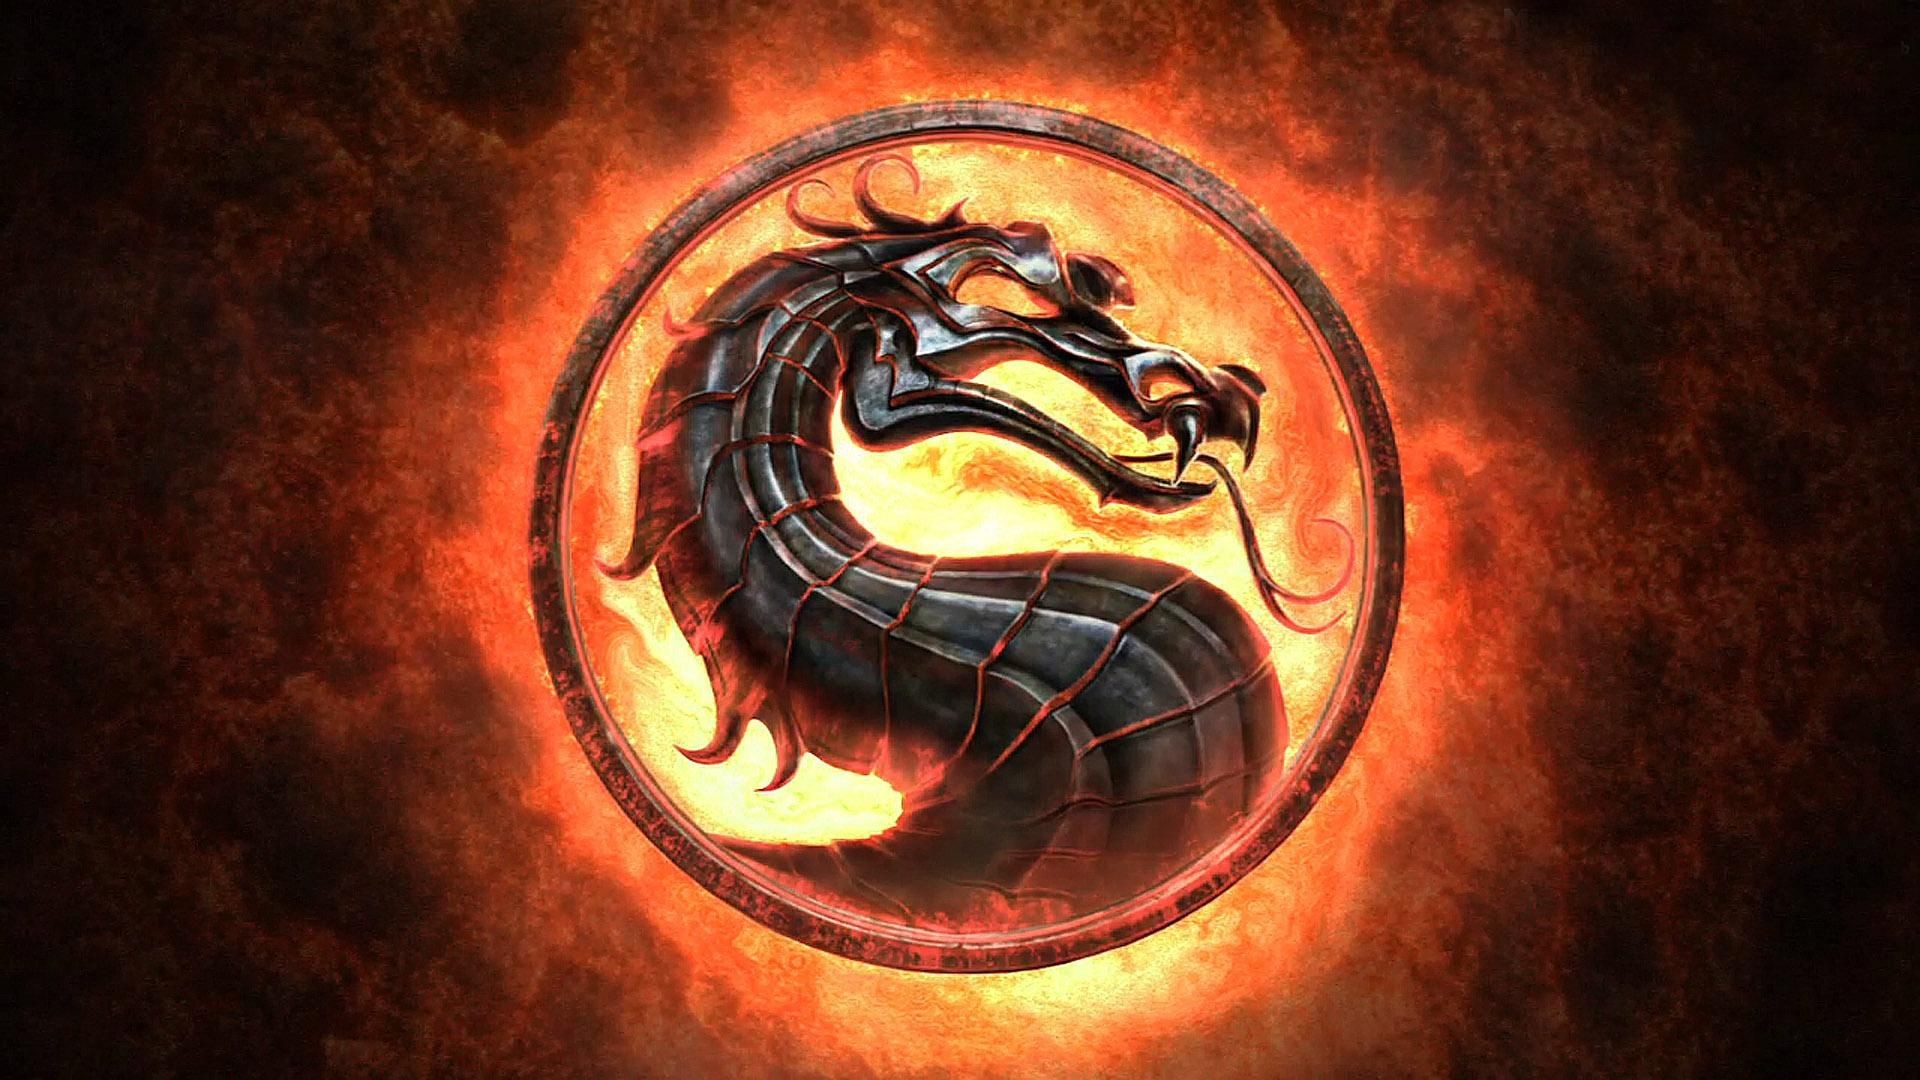 Check Out This Mortal Kombat ‘Fight Koreography’ Featurette